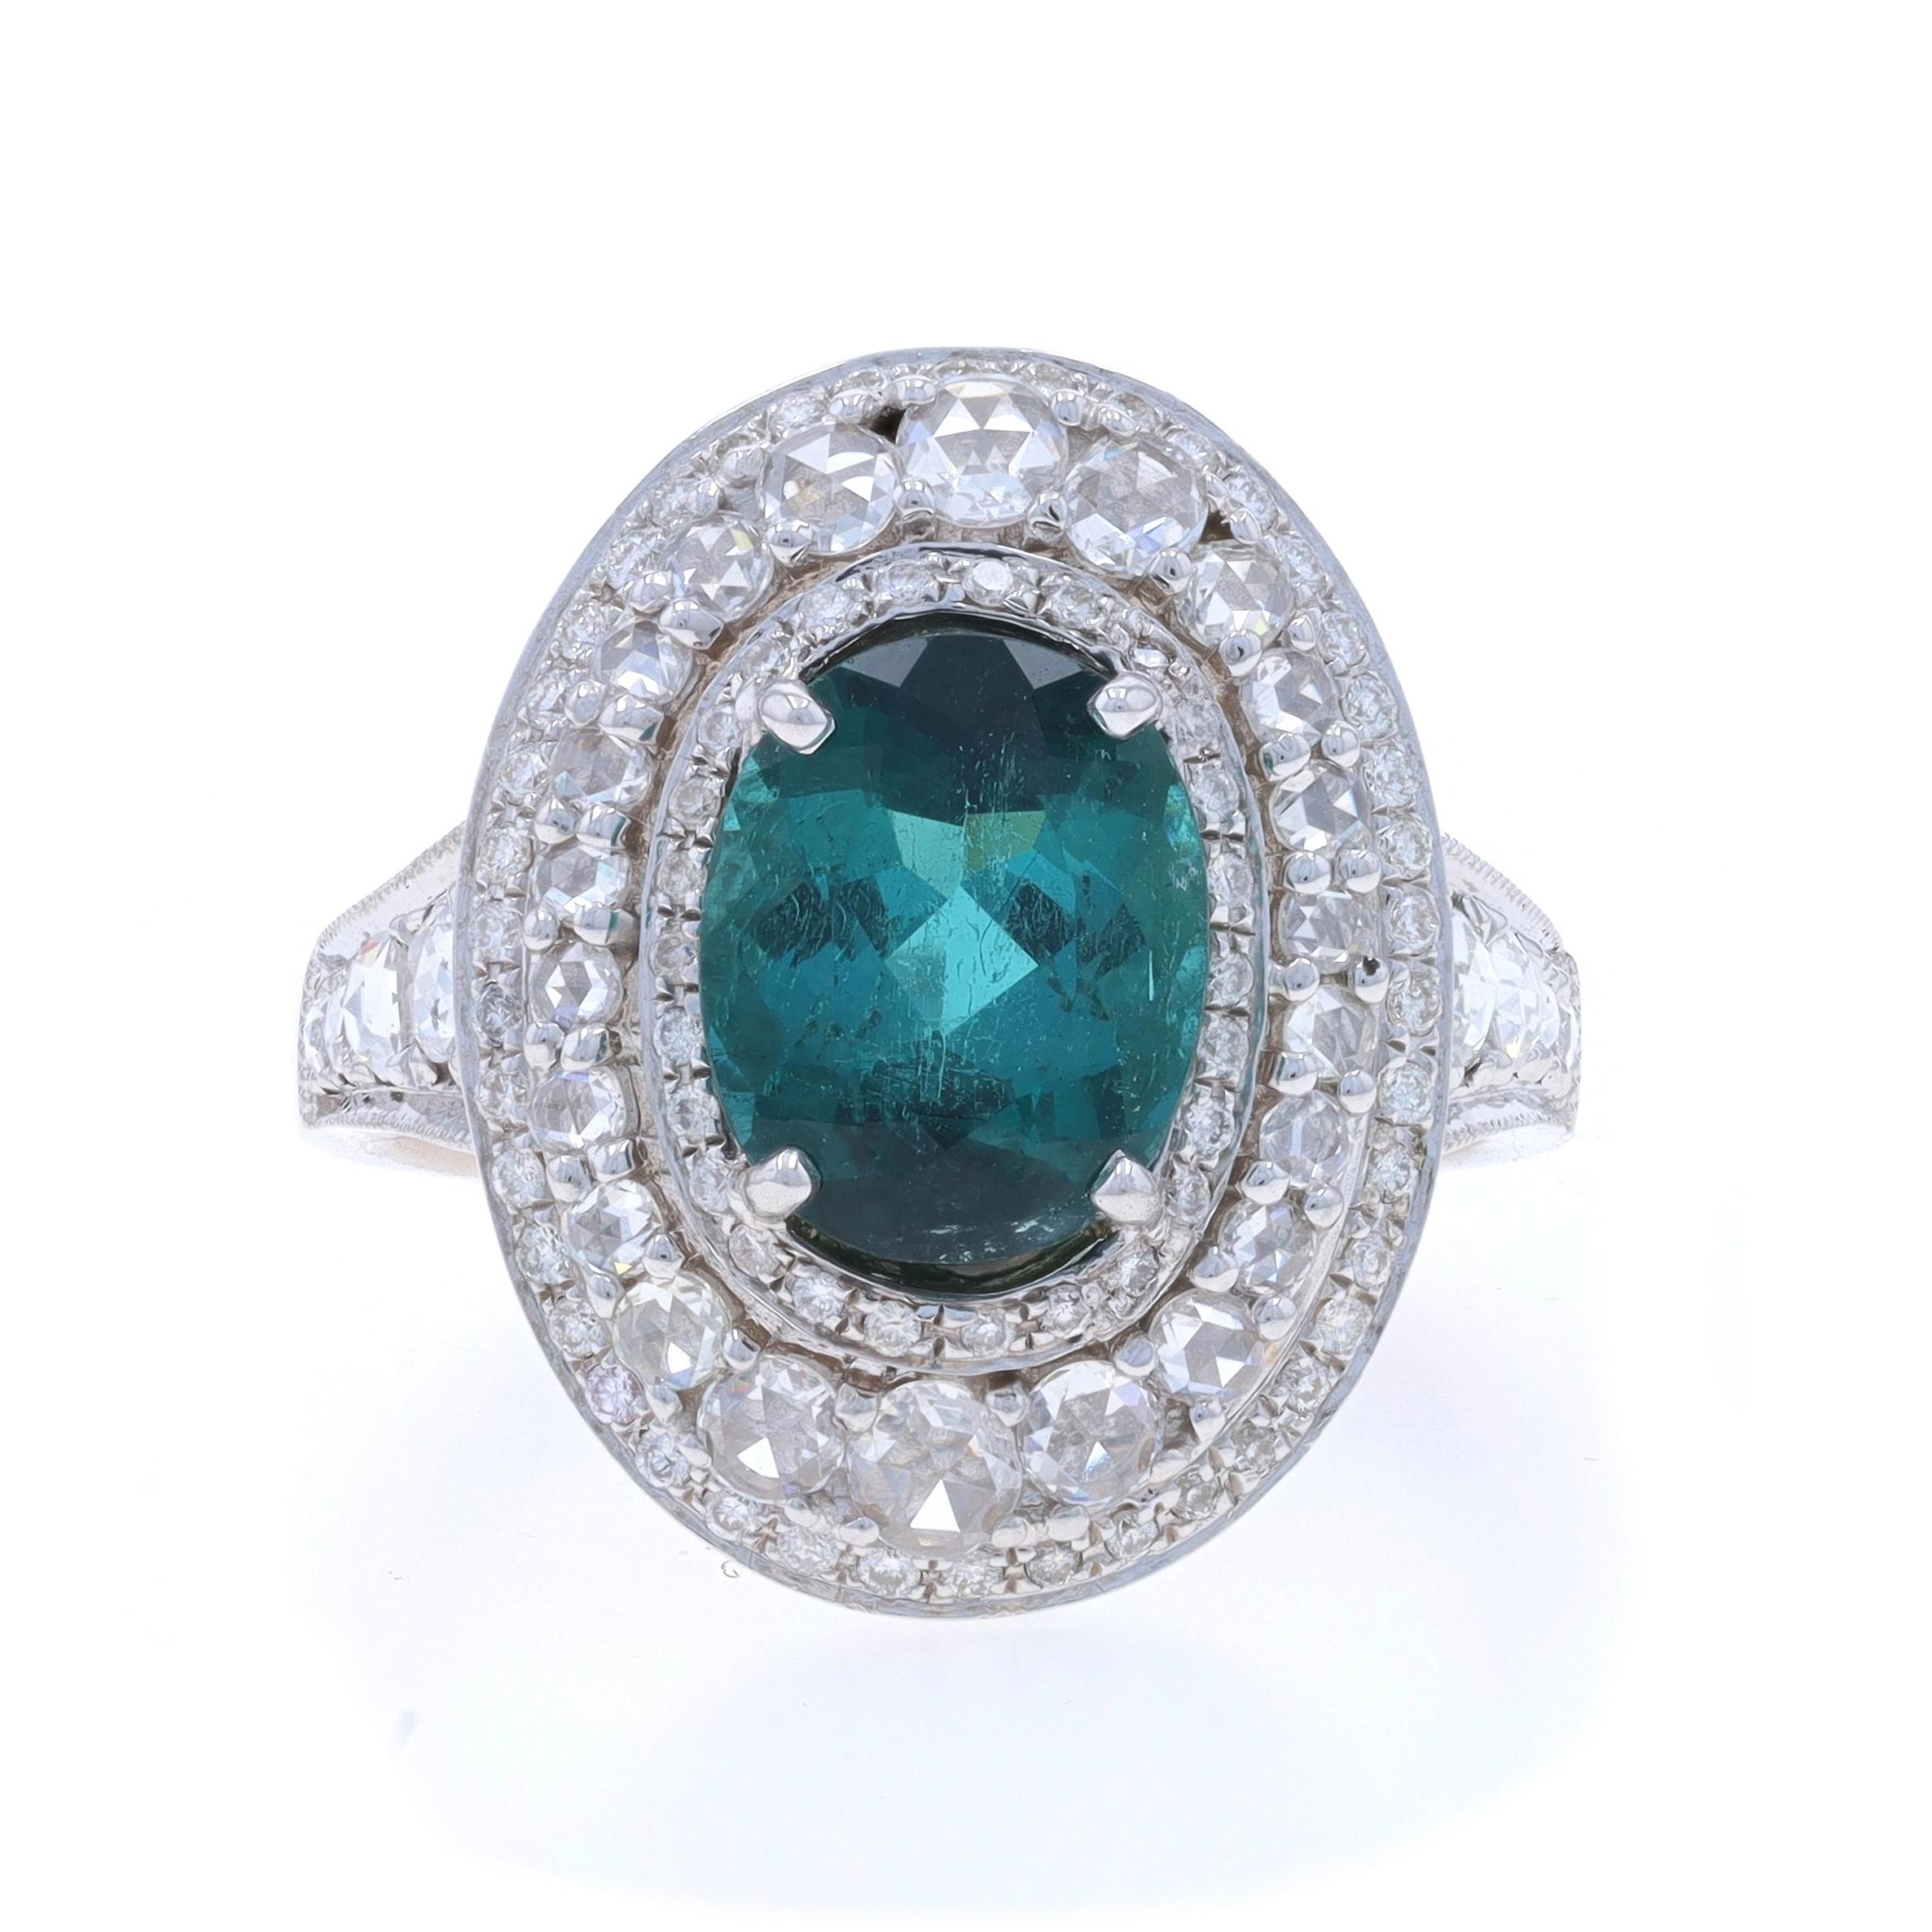 Size: 8 3/4
Sizing Fee: Up 2 sizes for $60 or Down 1 size for $40

Metal Content: 18k White Gold

Stone Information

Natural Indicolite Tourmaline
Carat(s): 3.41ct
Cut: Oval
Color: Bluish Green

Natural Diamonds
Carat(s): 1.75ctw
Cut: Rose & Round